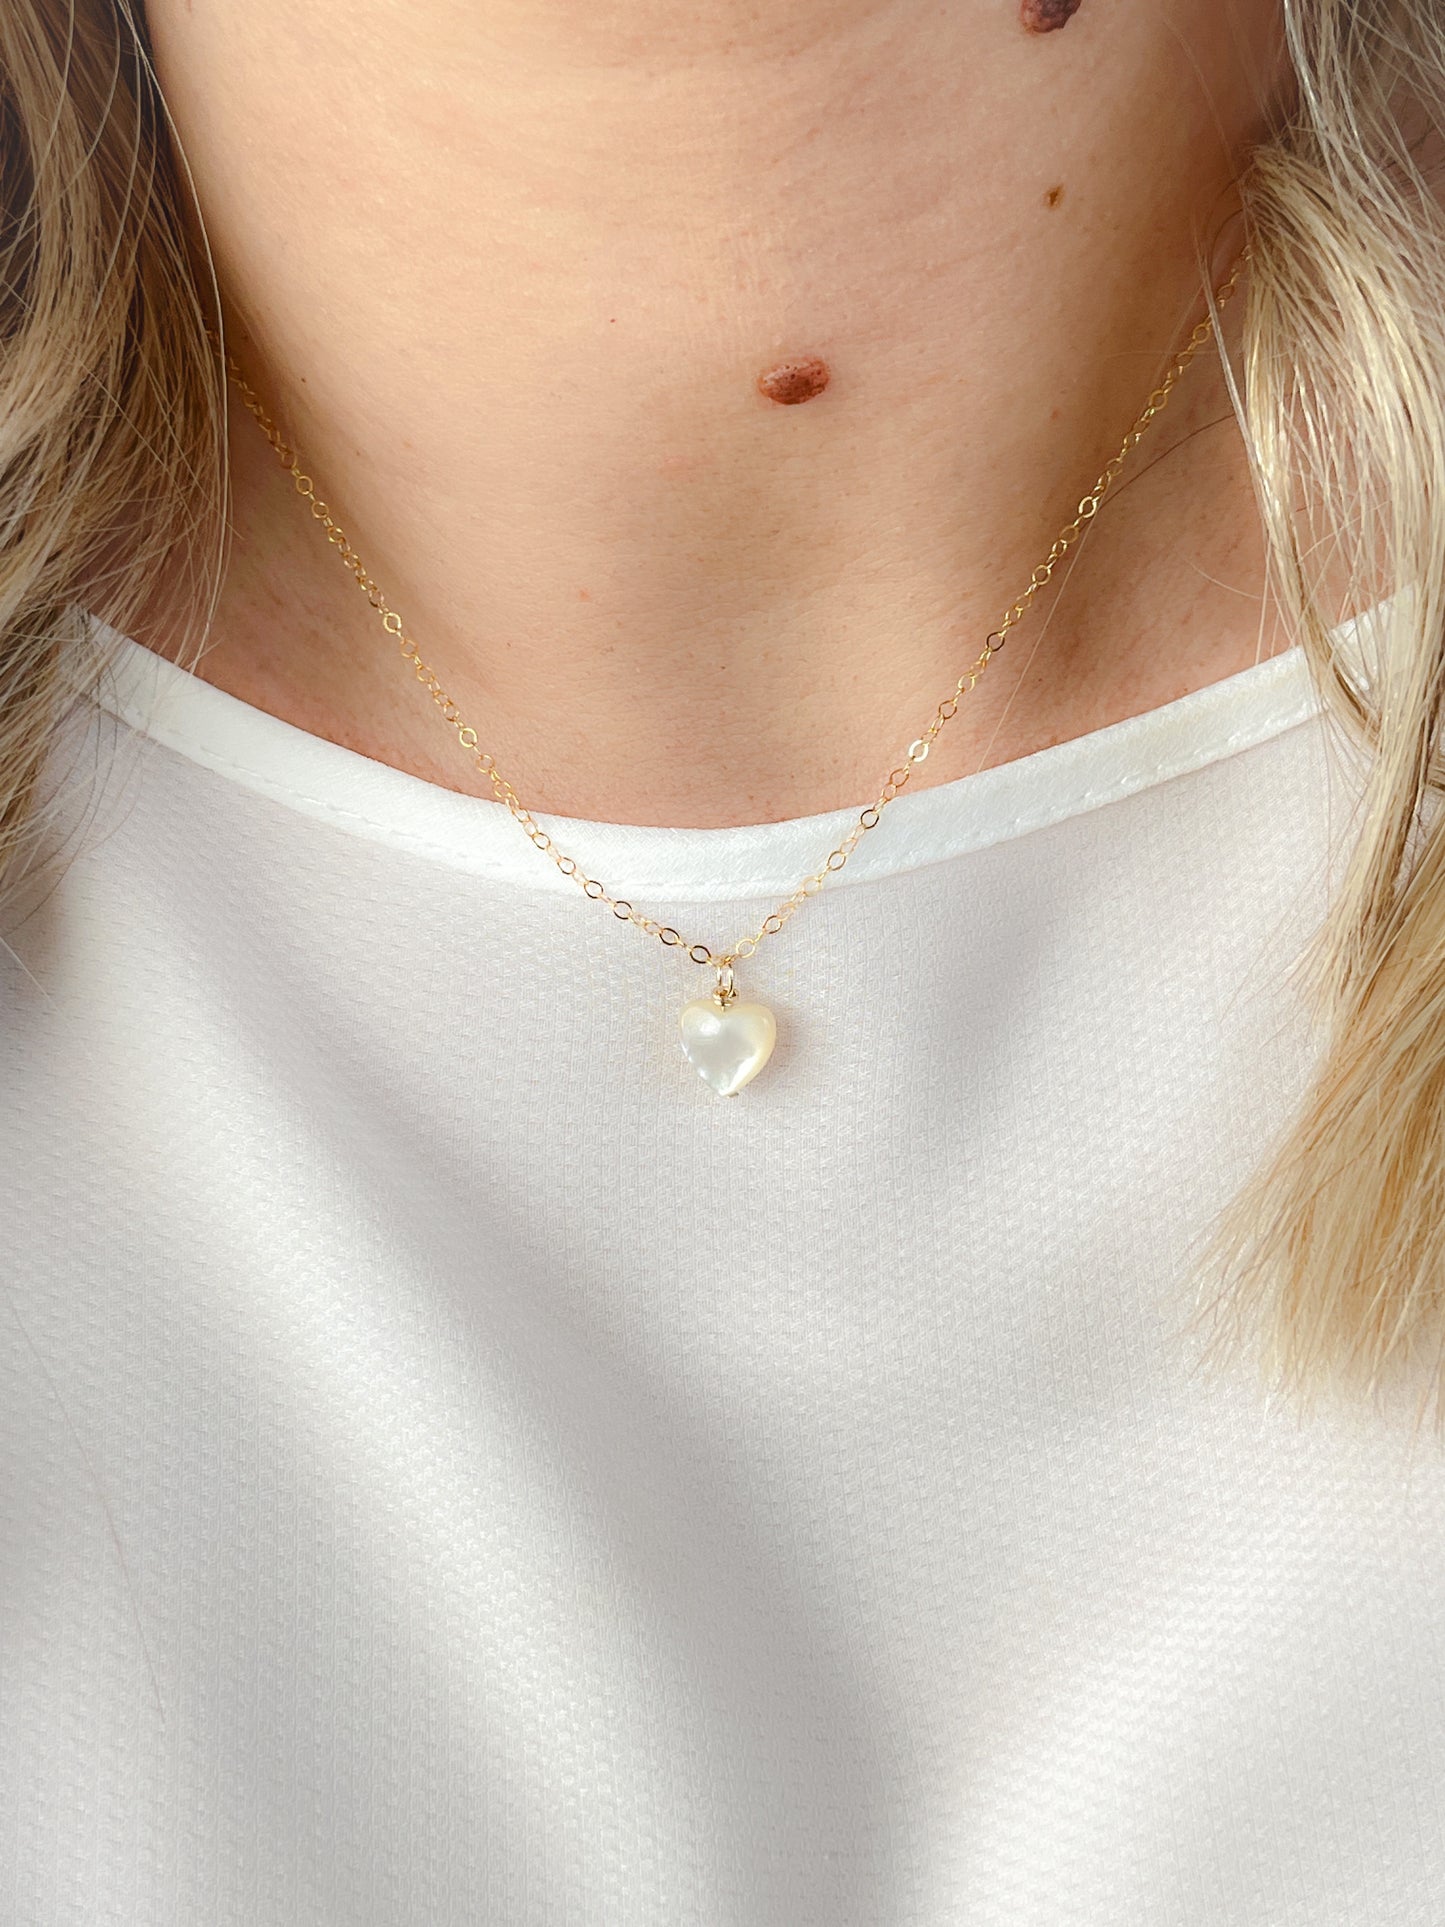 SAMPLE SALE - Gold Mother of Pearl Heart Gift Necklace